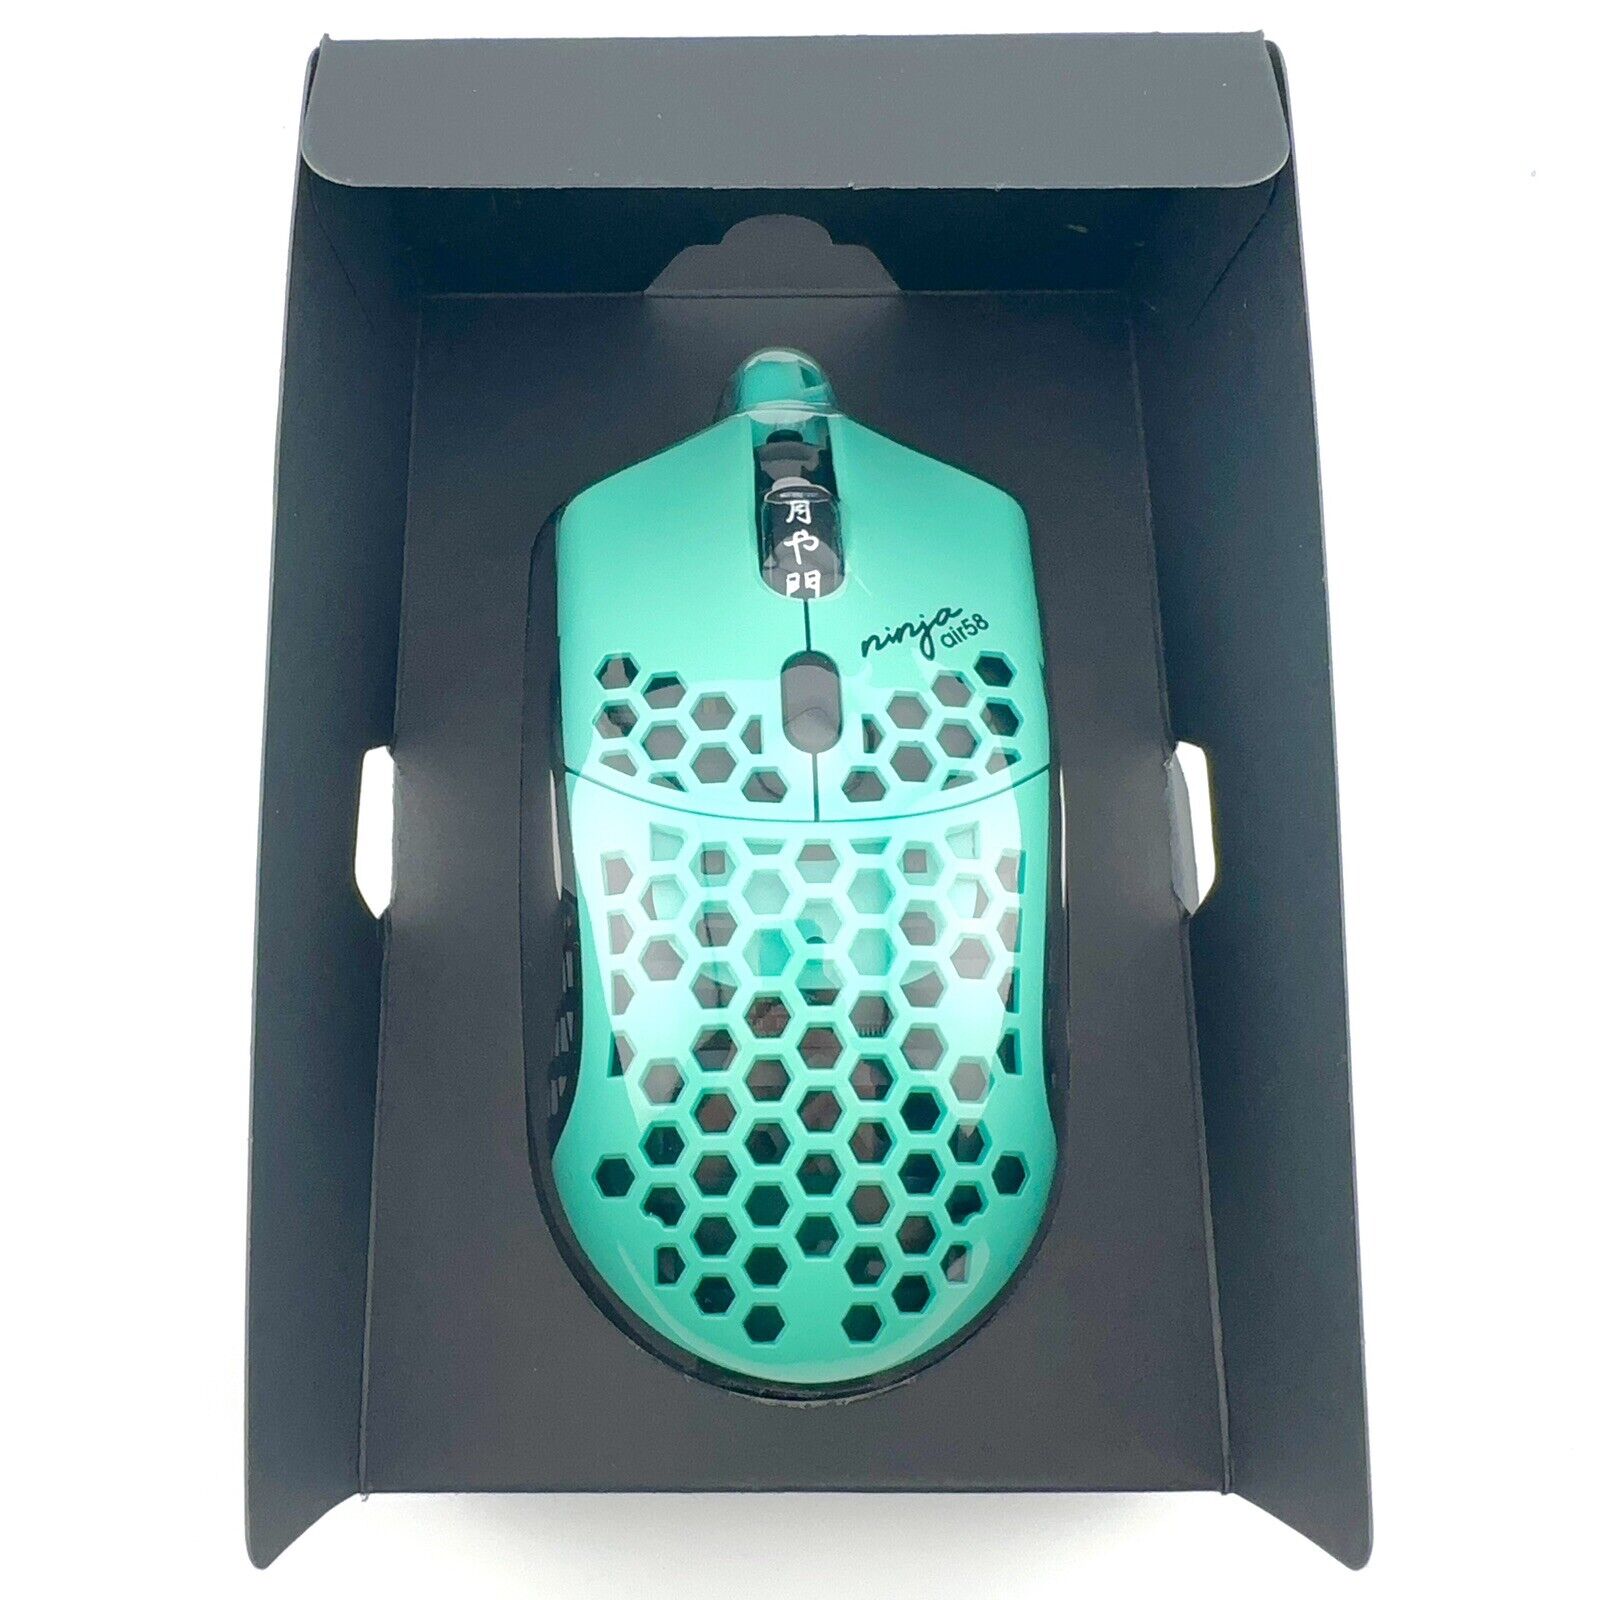 Finalmouse Air58 Ninja Gaming Mouse - Cherry Blossom Blue